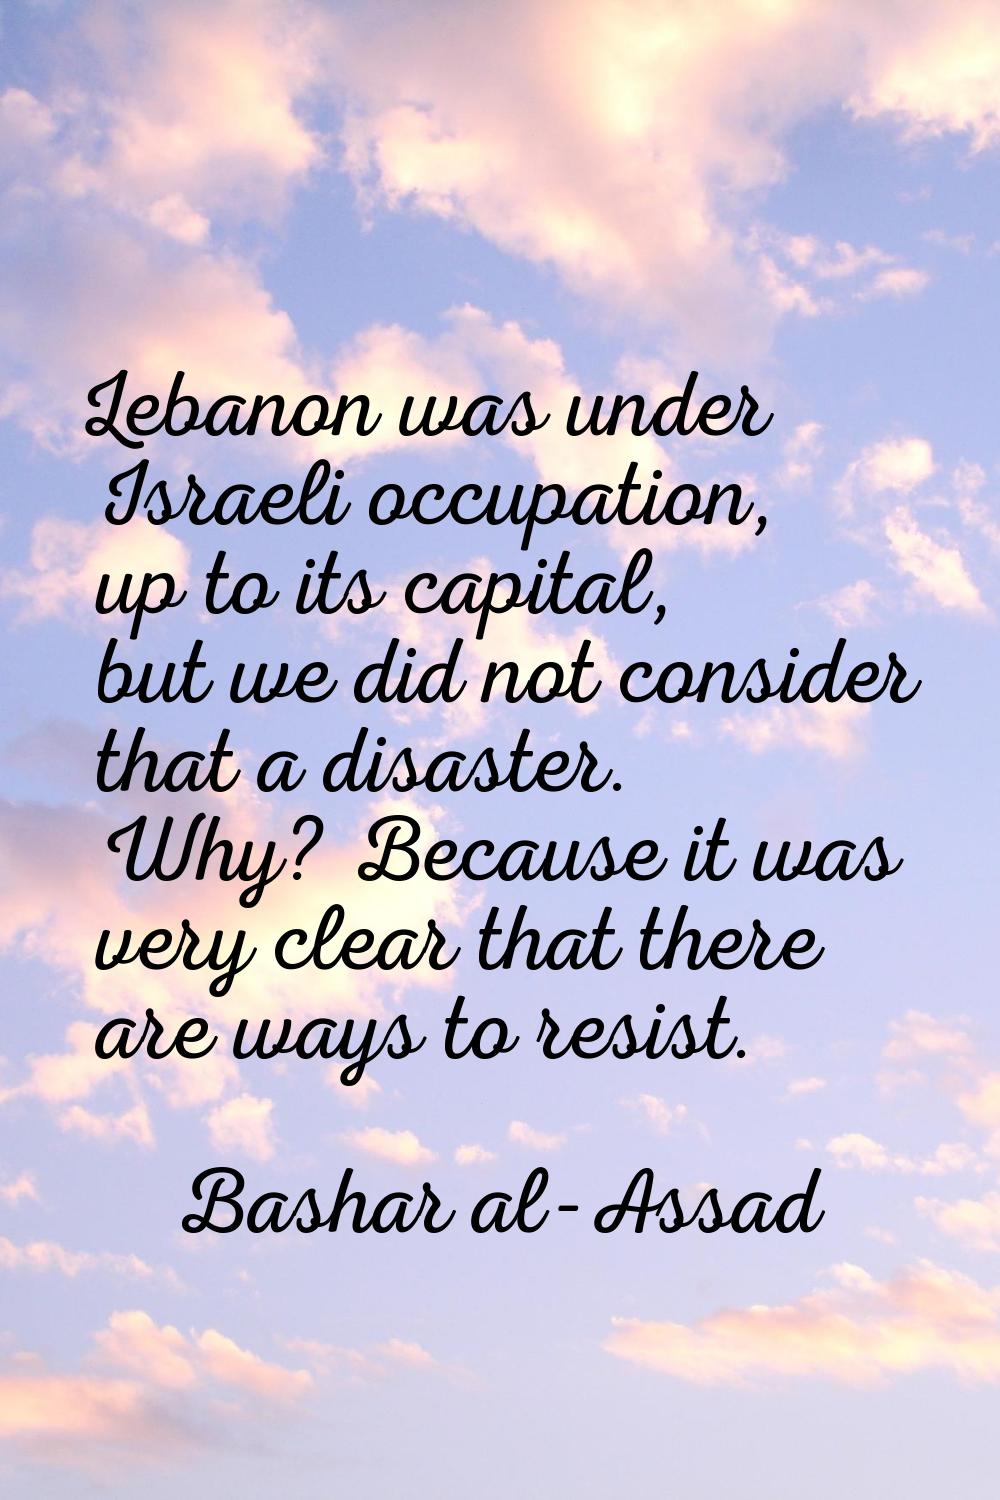 Lebanon was under Israeli occupation, up to its capital, but we did not consider that a disaster. W